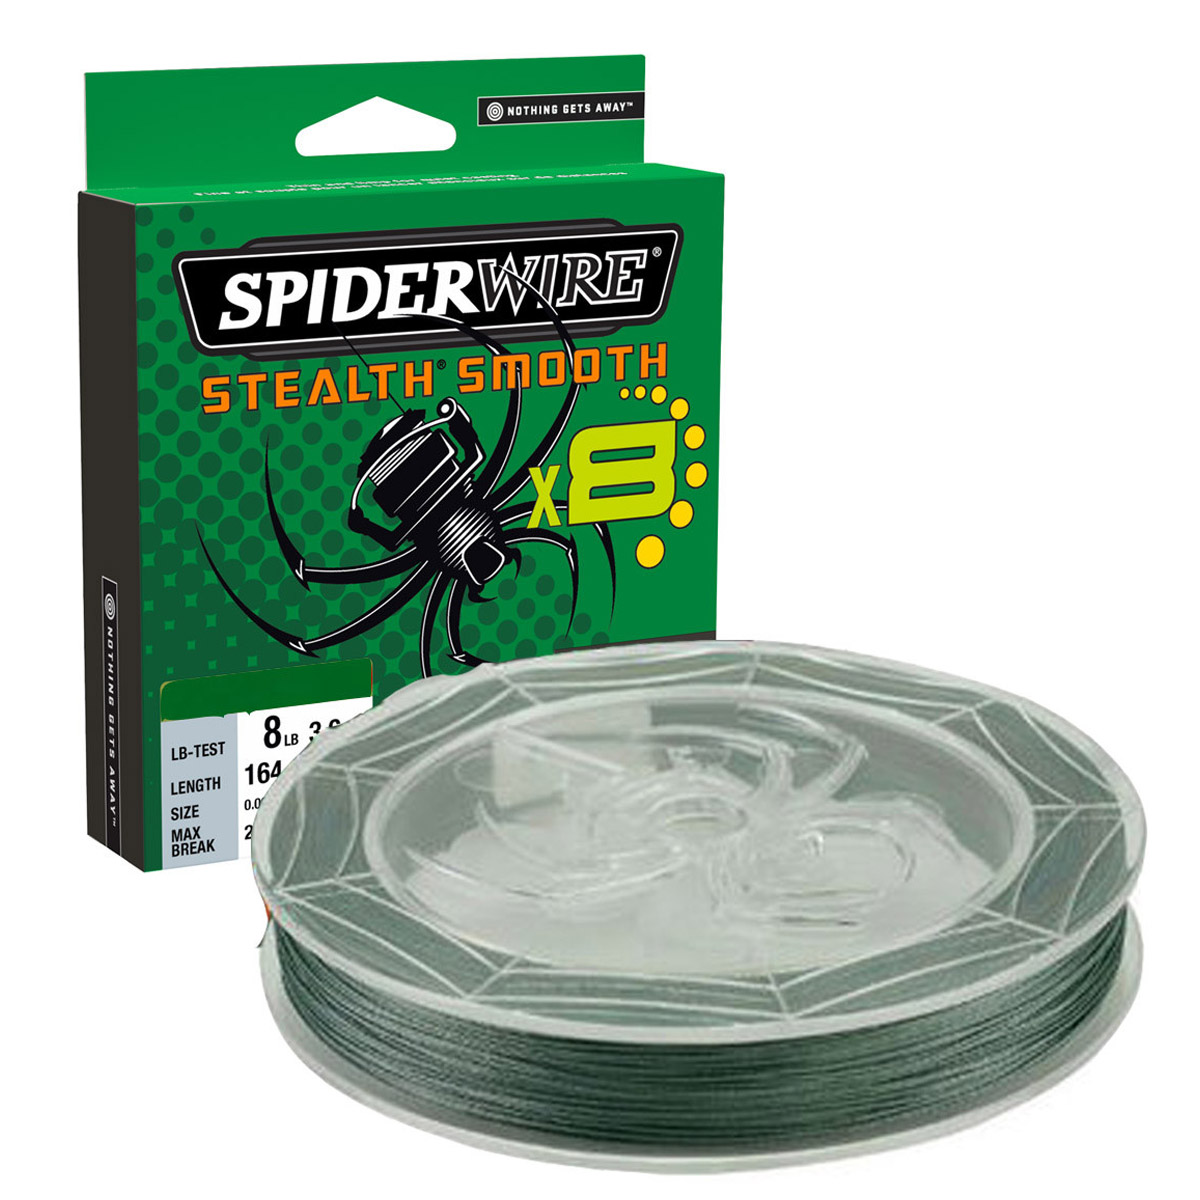 Spiderwire Stealth Smooth 8 Moss Green 150 M